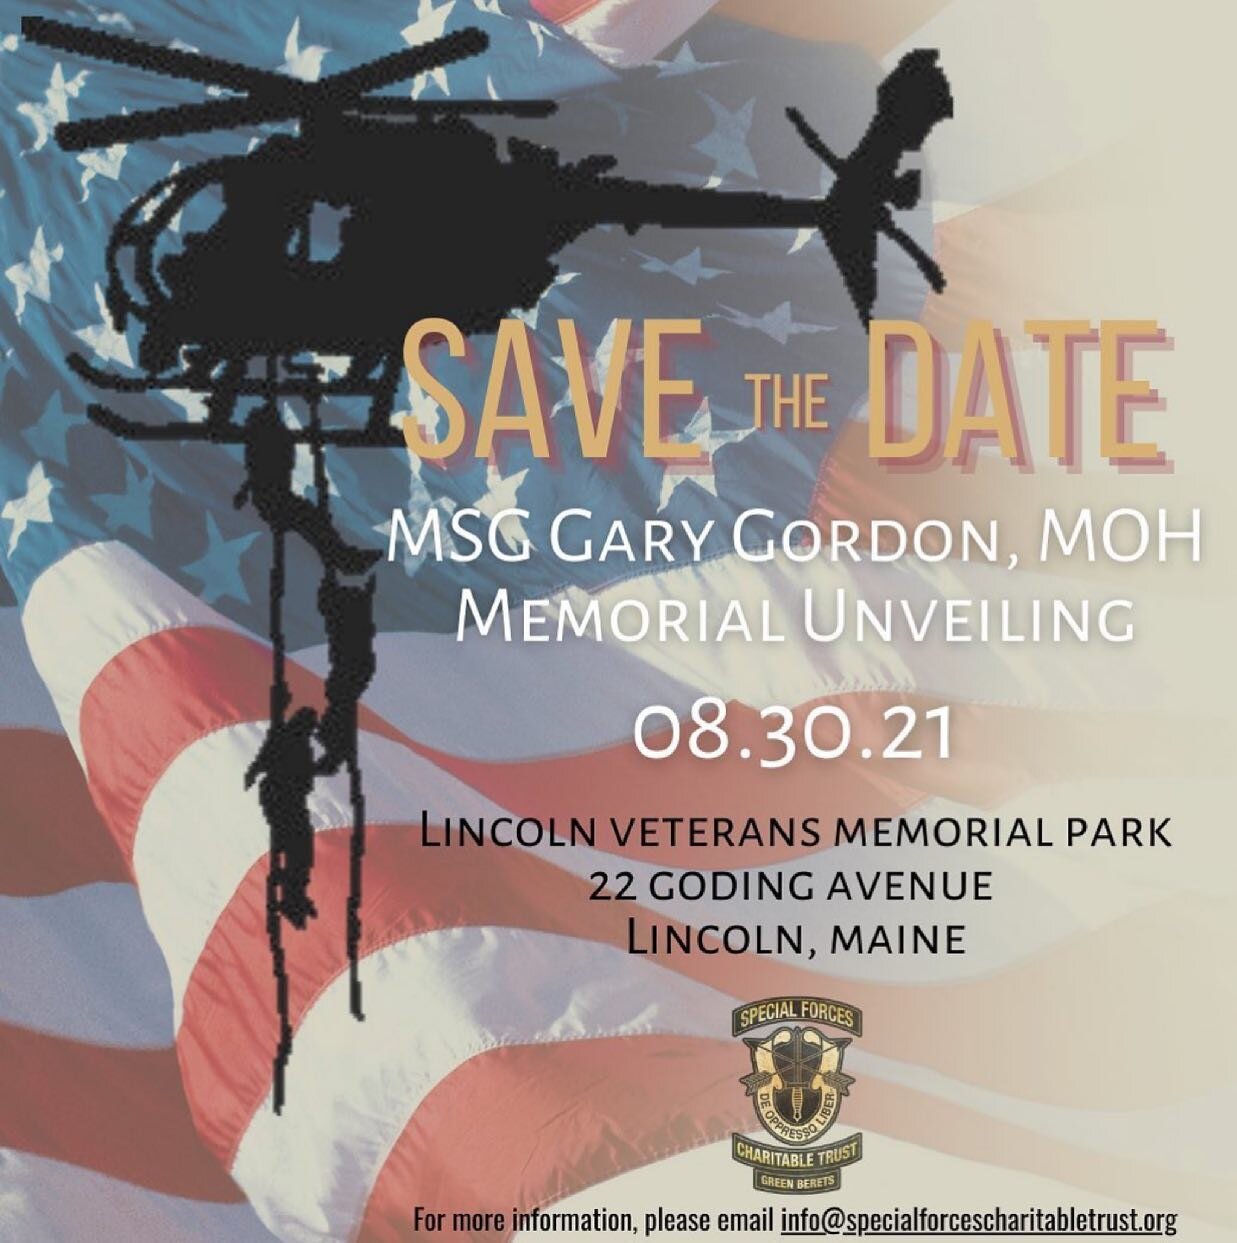 Repost: @sfcharitabletrust SAVE THE DATE: August 30th! Join us in Lincoln, Maine to celebrate the unveiling of the MSG Gary Gordon, MOH Memorial Statue! 

If you would like more information, please email info@specialforcescharitabletrust.org

#sfchar